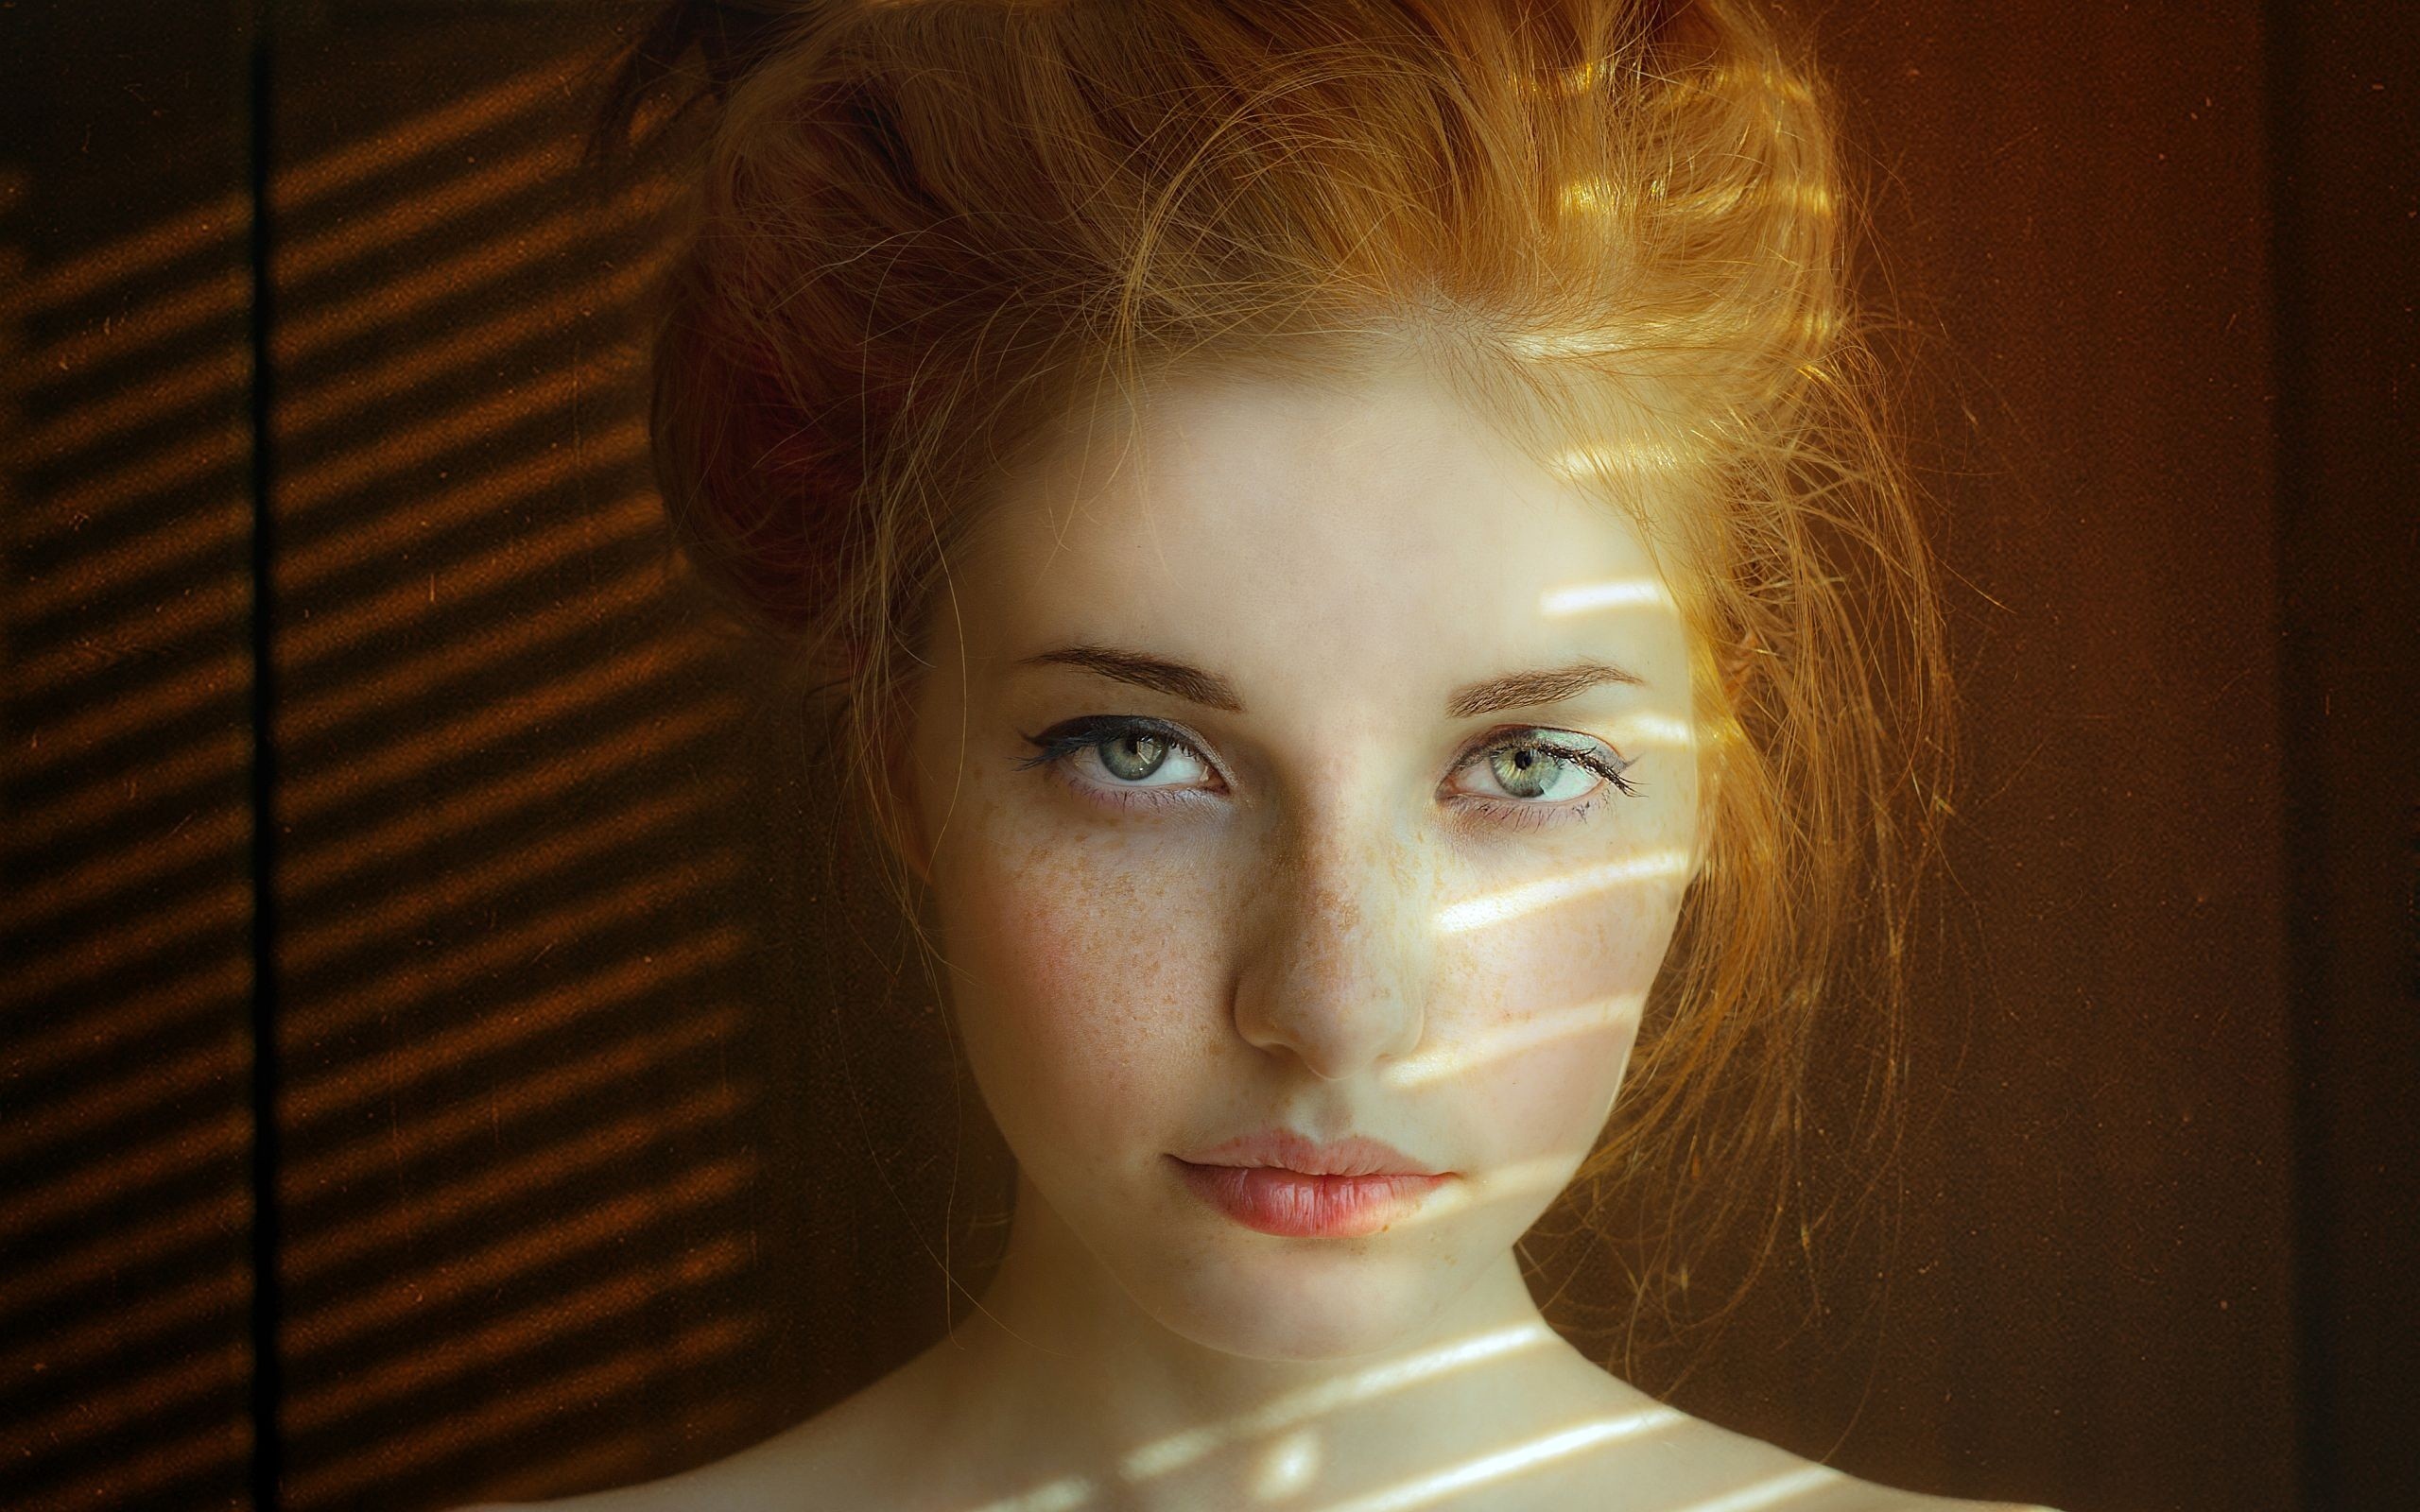 cherie horne share pretty redheads with green eyes photos